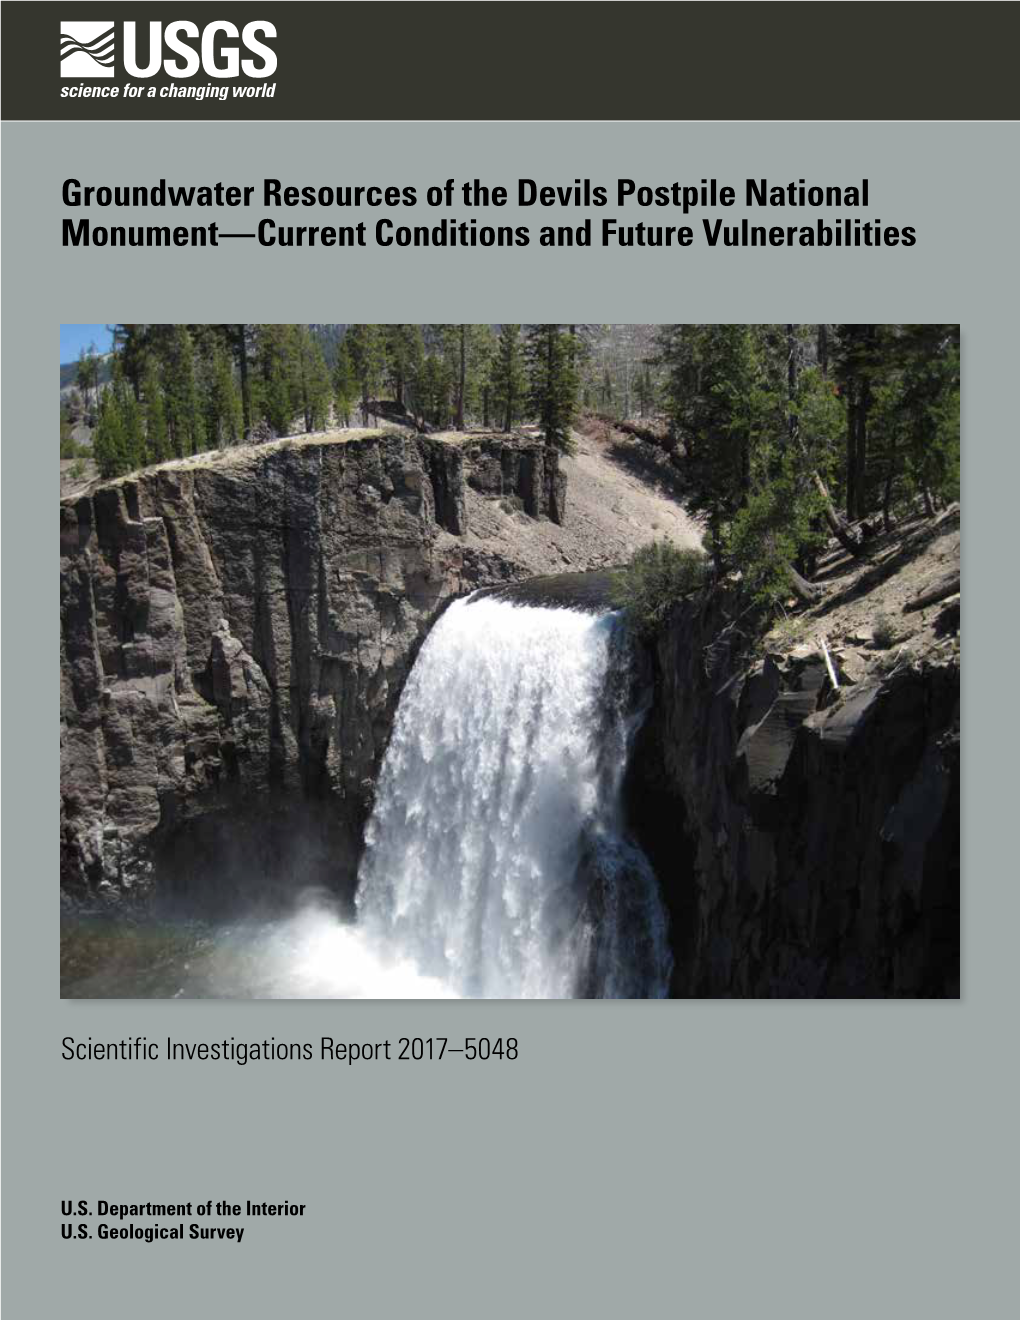 Groundwater Resources of the Devils Postpile National Monument—Current Conditions and Future Vulnerabilities